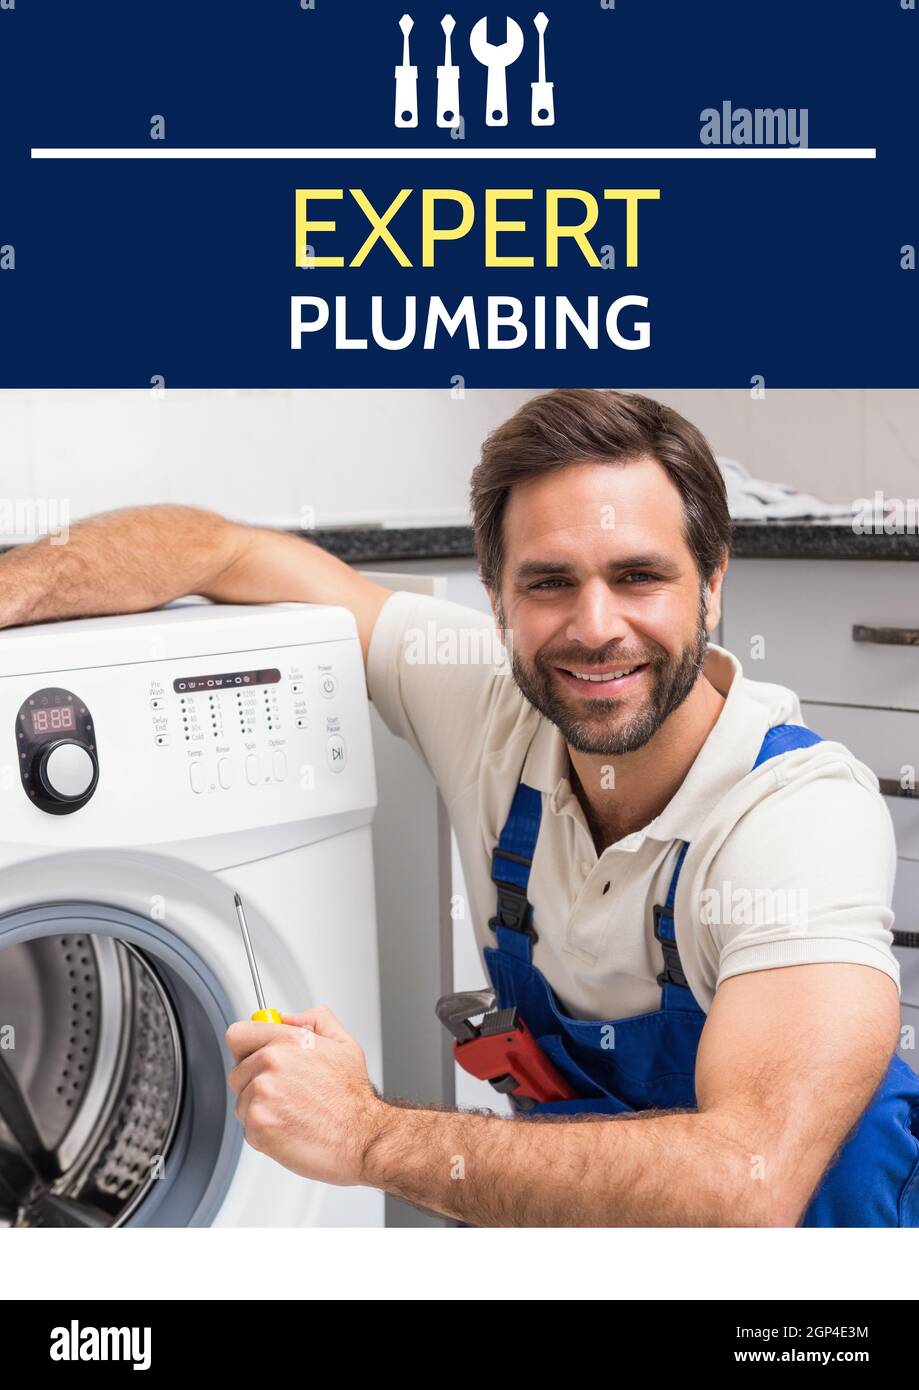 Composition of expert plumbing text over smiling caucasian male plumber fixing washing machine Stock Photo